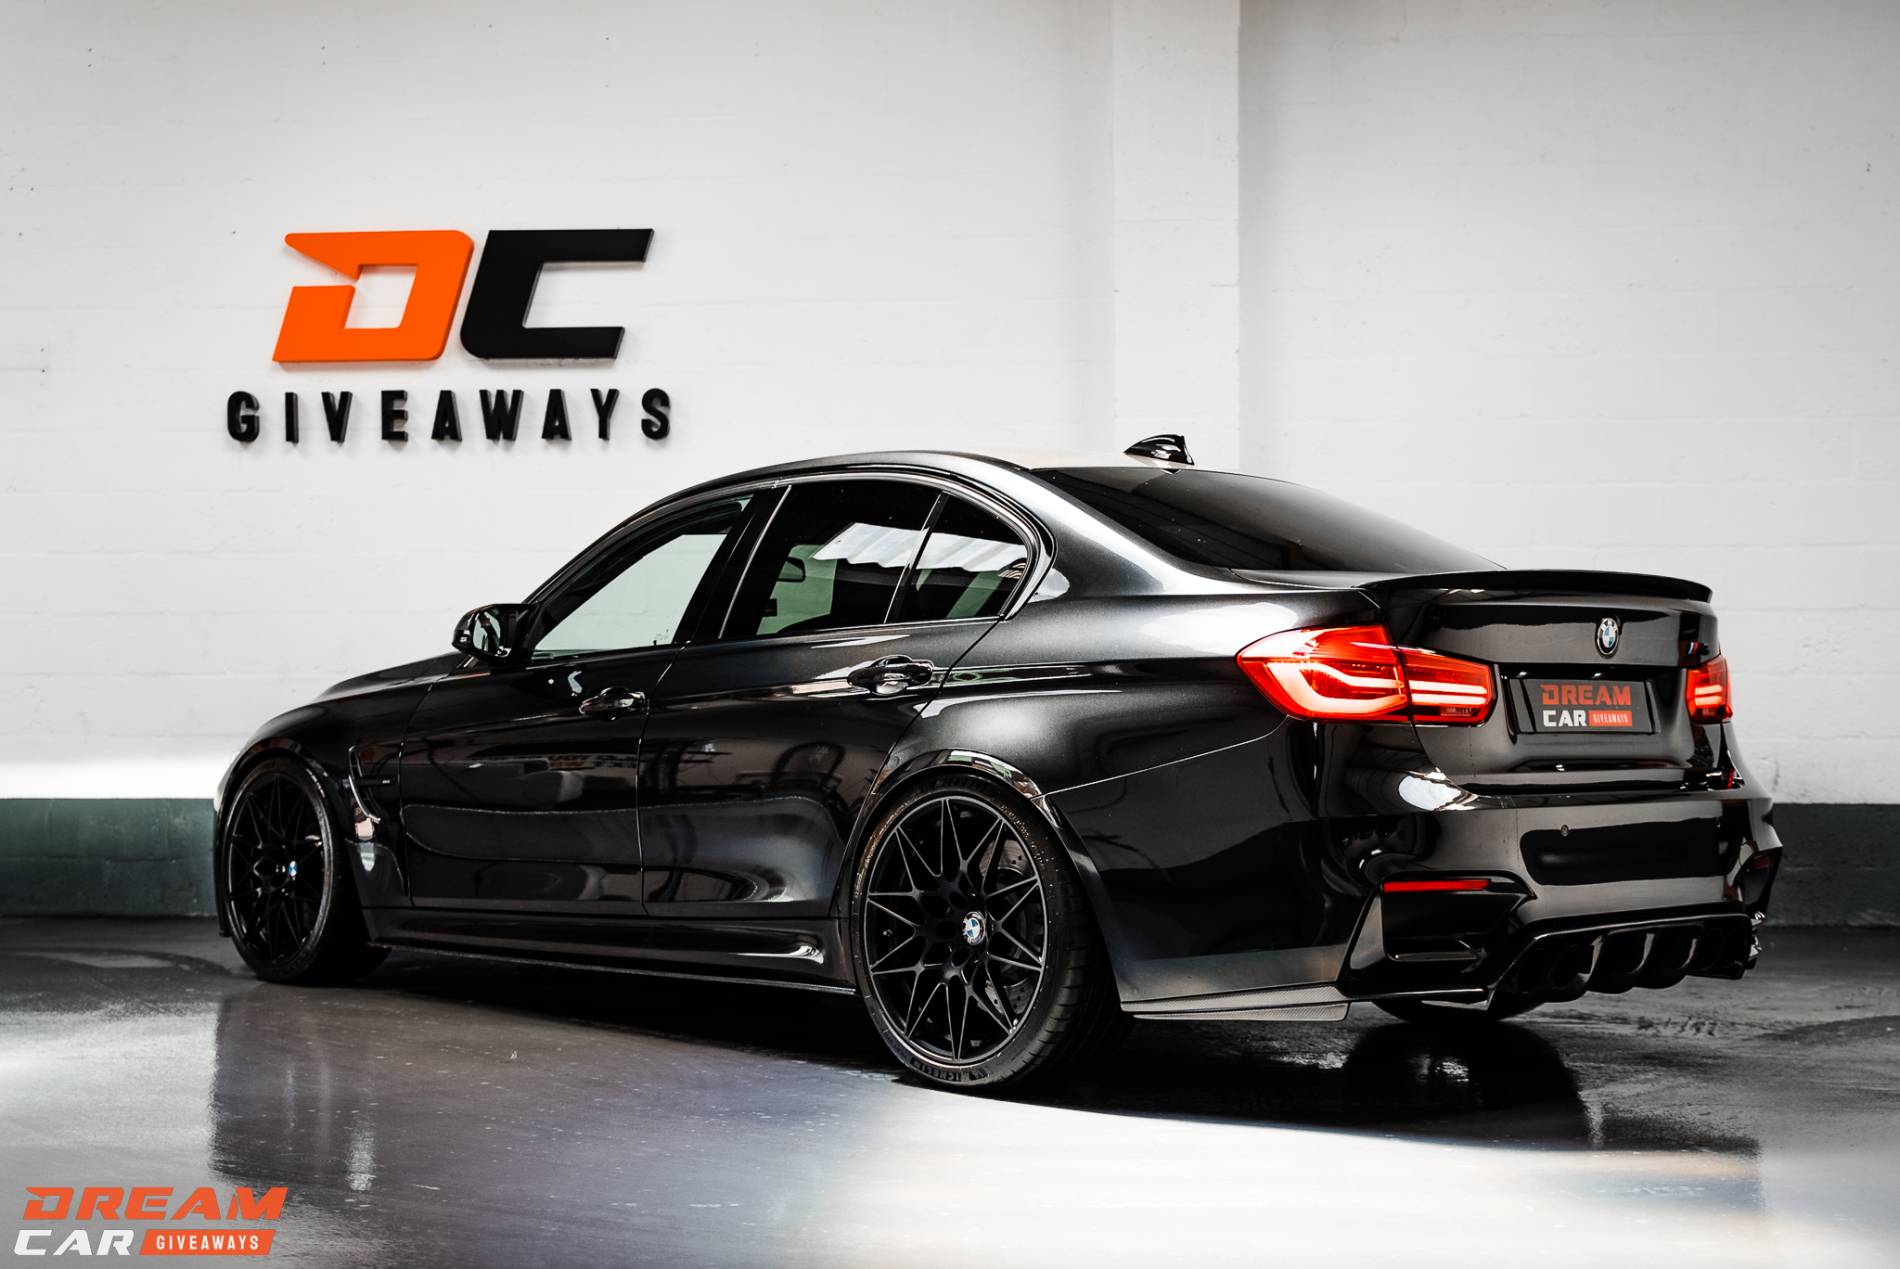 BMW M3 Competition & £1500 or £33,000 Tax Free